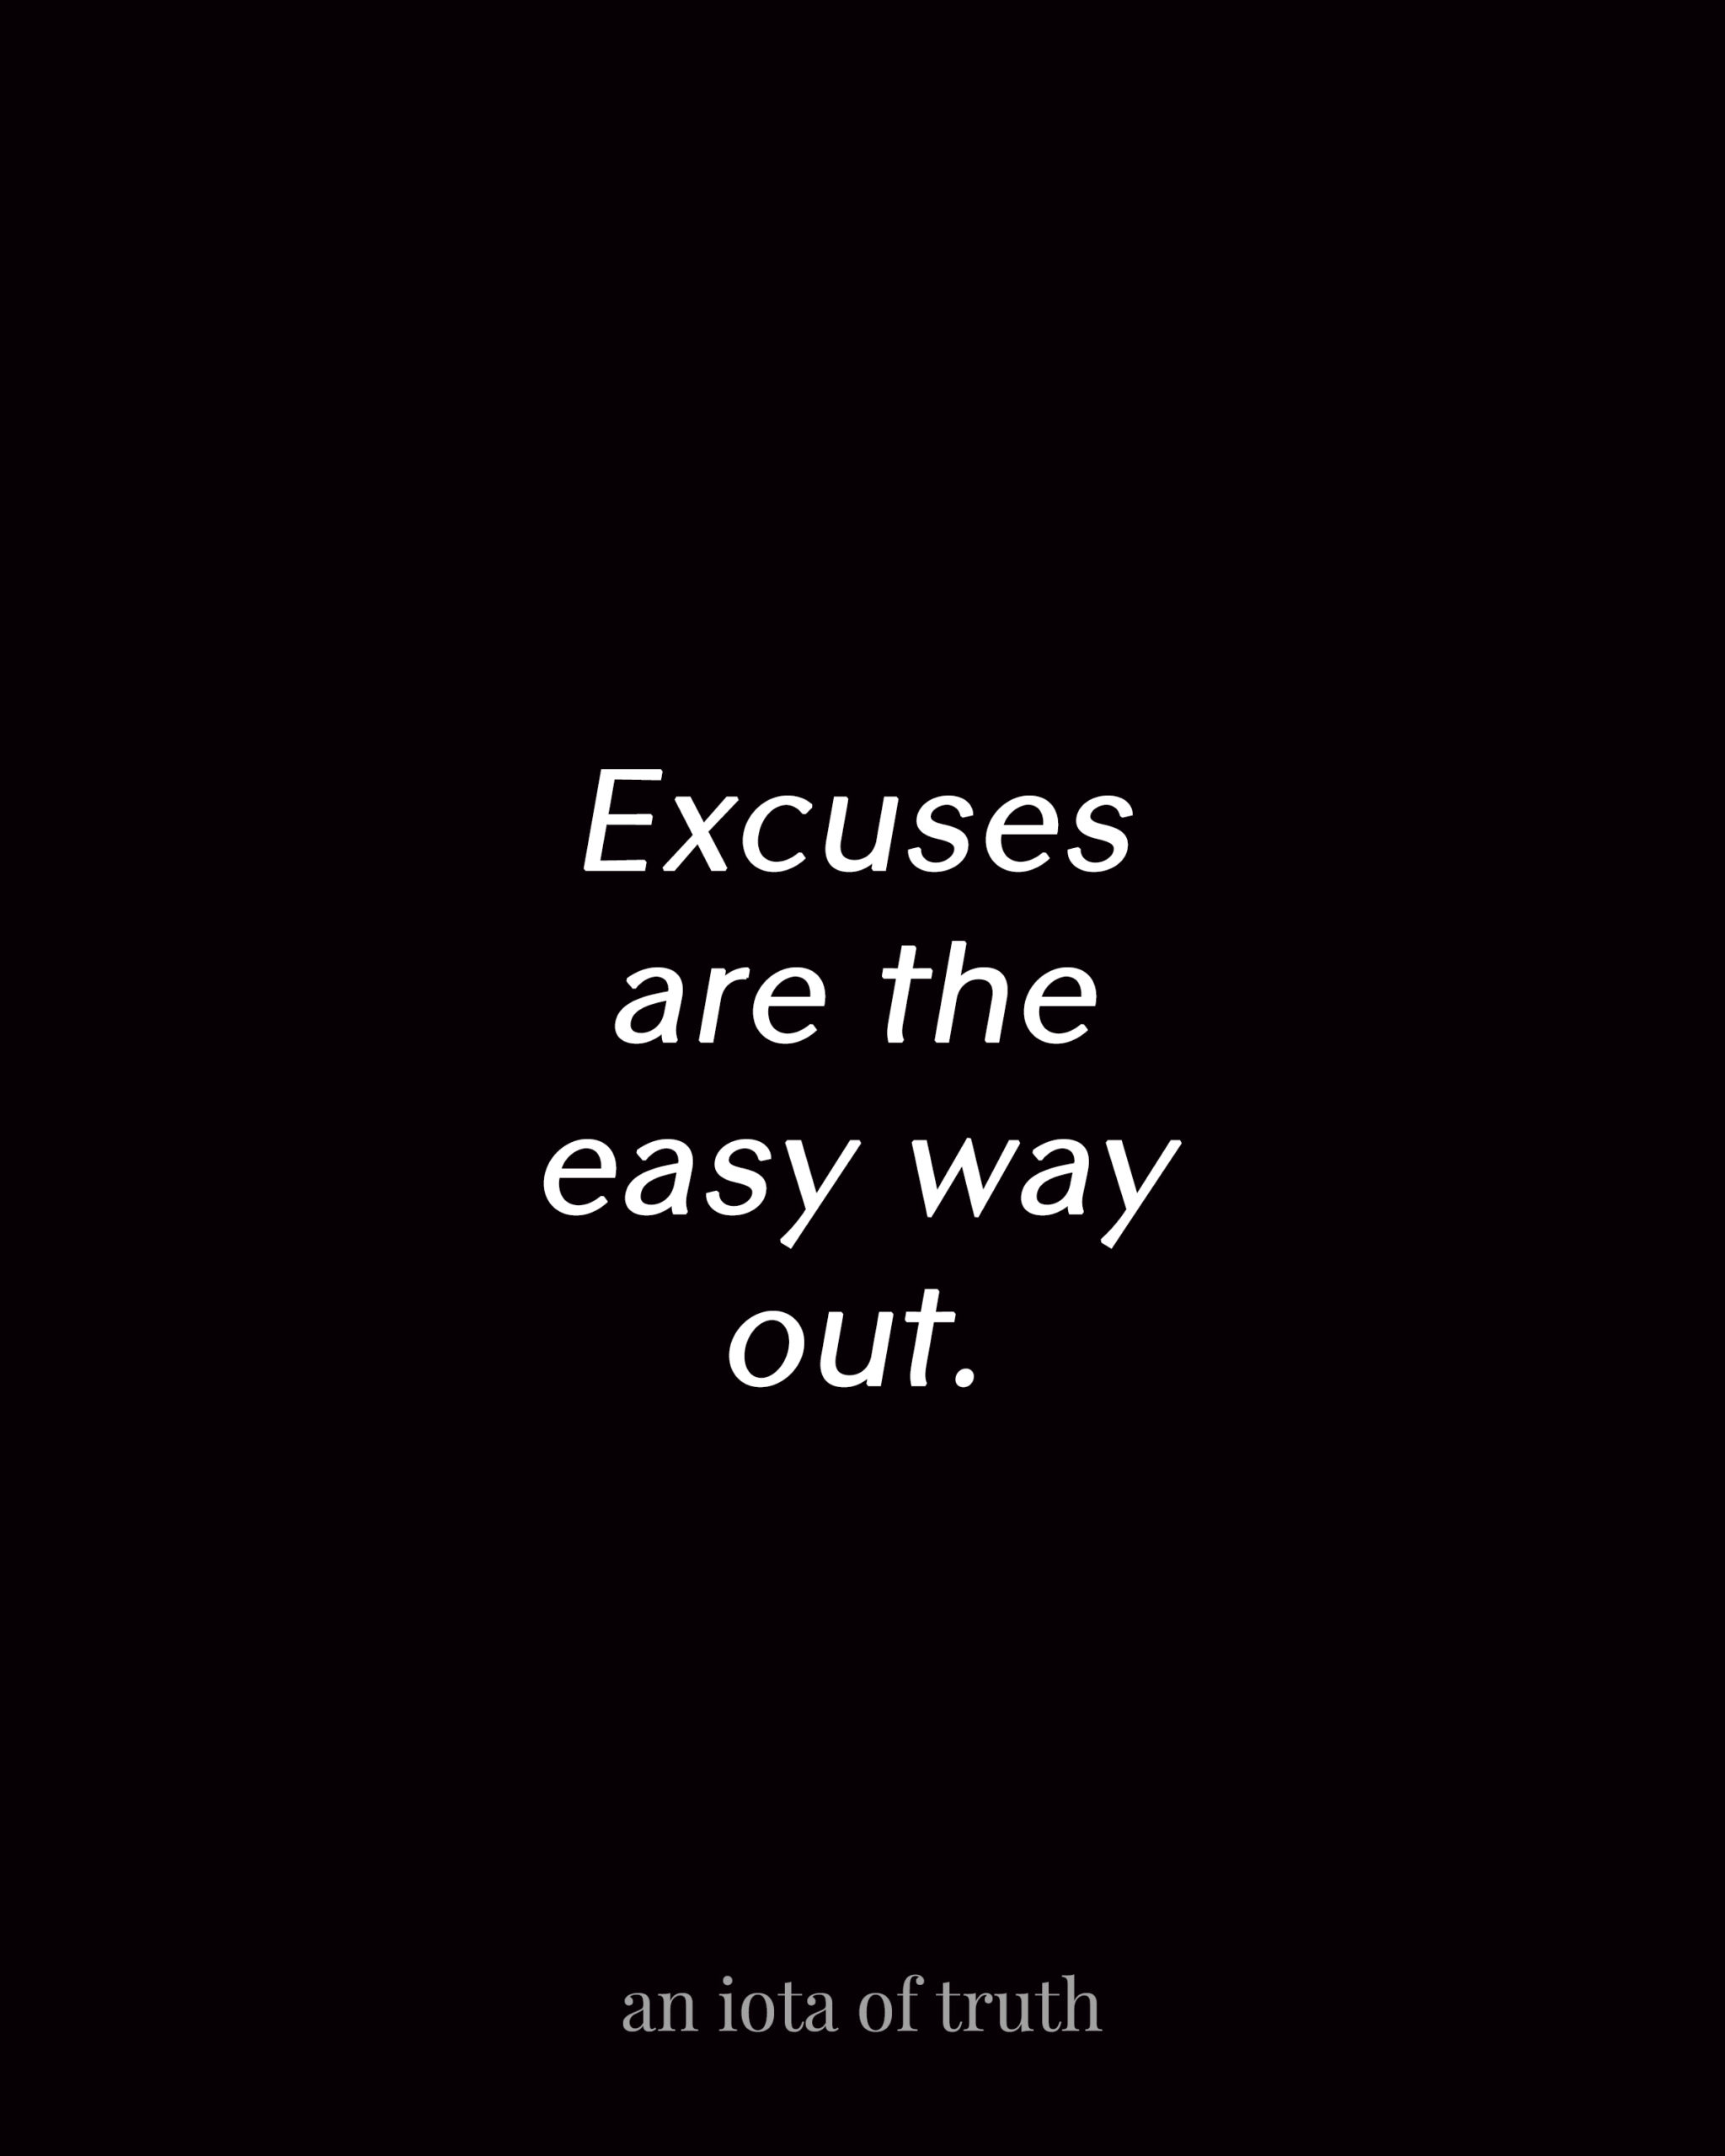 Excuses are the easy way out.